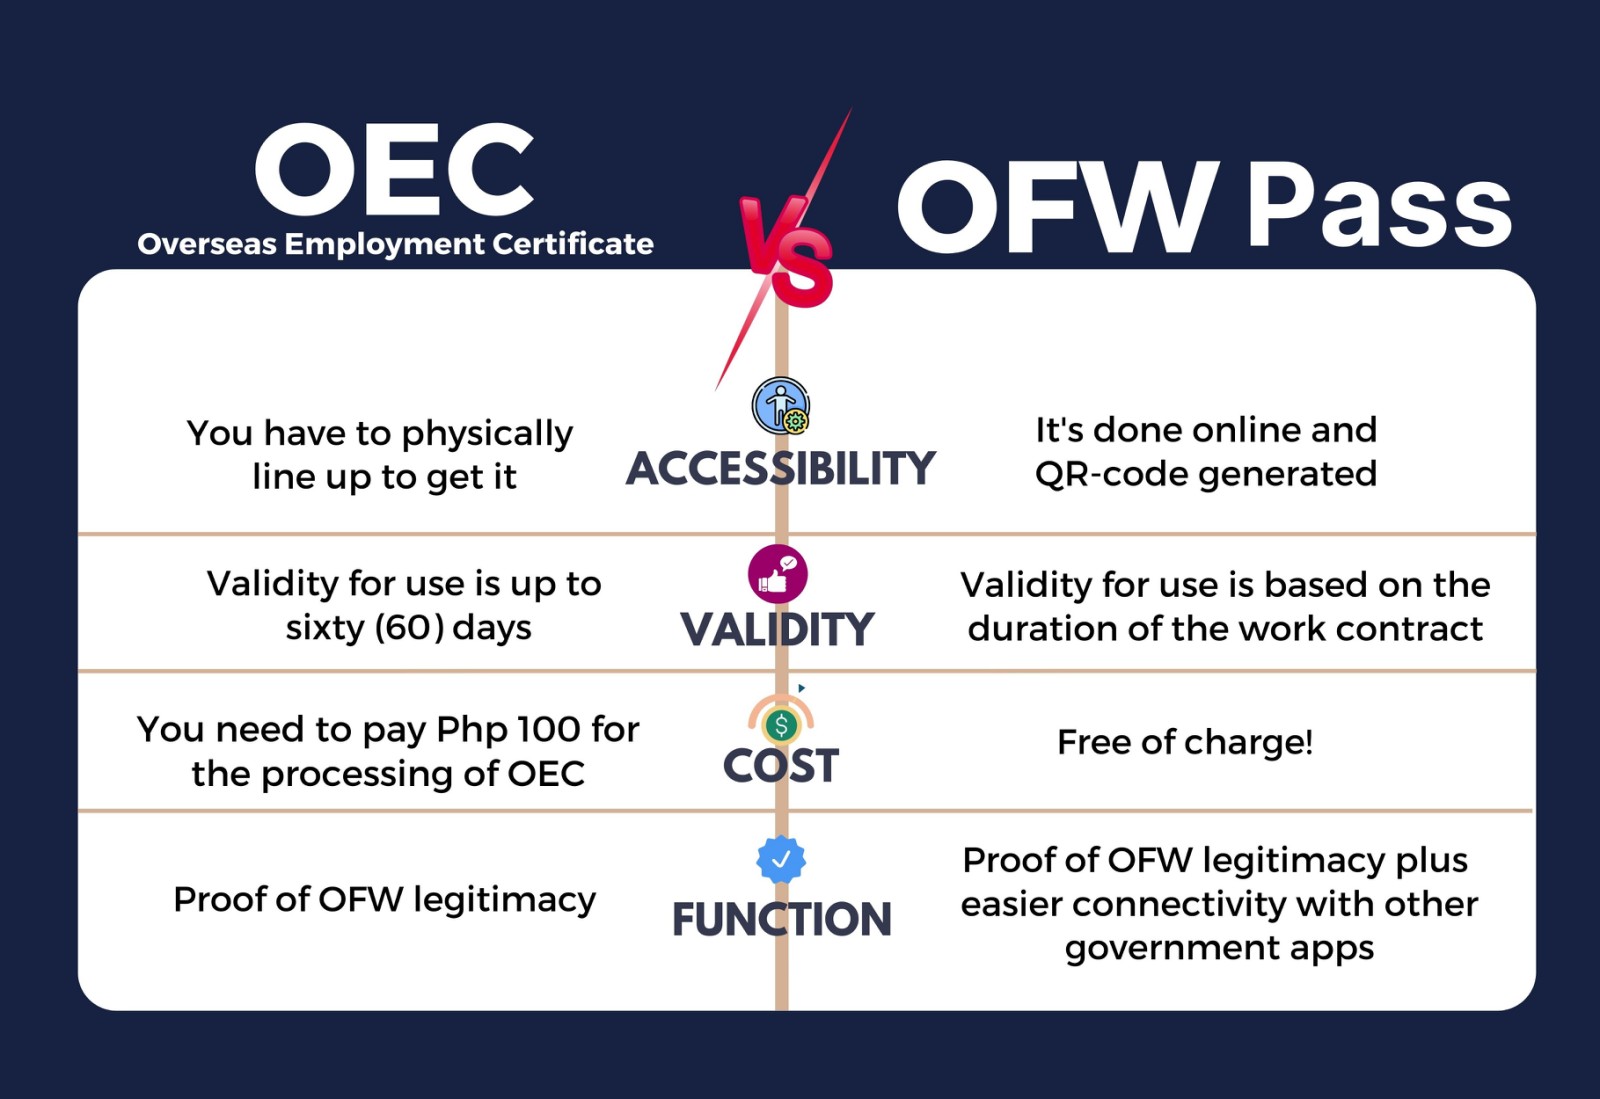 OFW Pass different from the Overseas Employment Certificate (OEC)